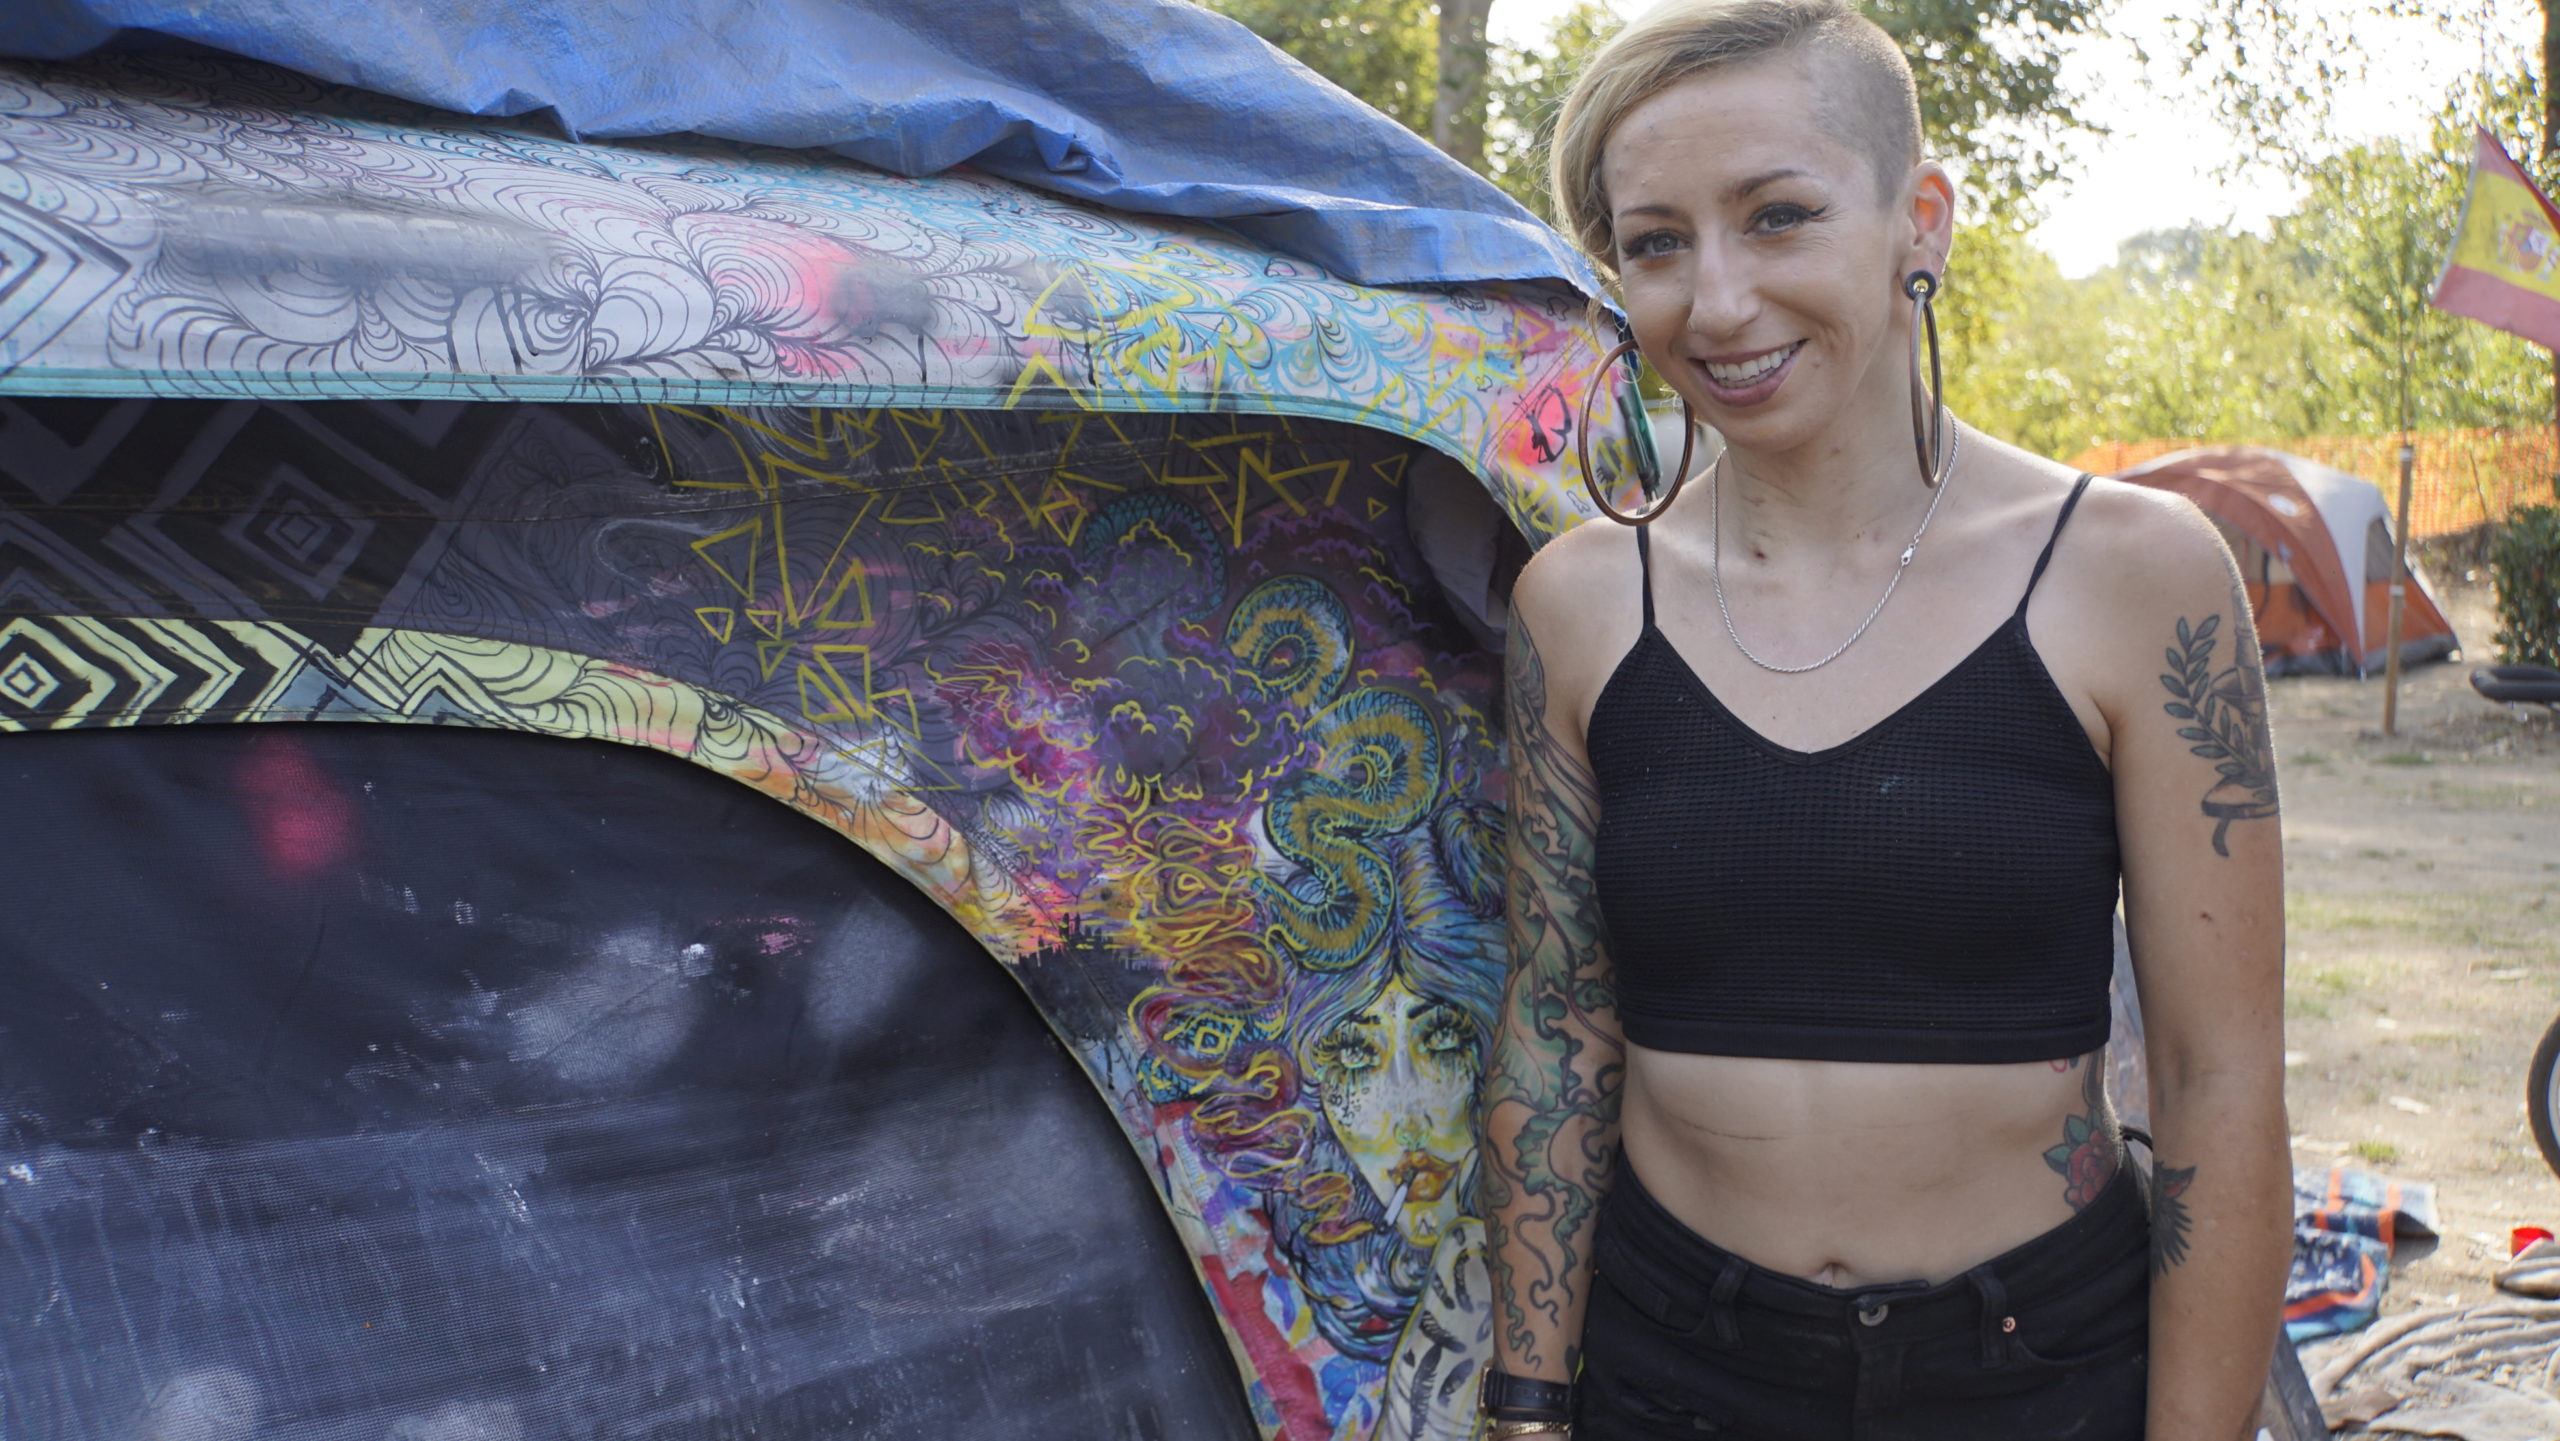 Milan Evje stands next to her tent artwork at the Benchlands homeless camp in Santa Cruz in September 2021